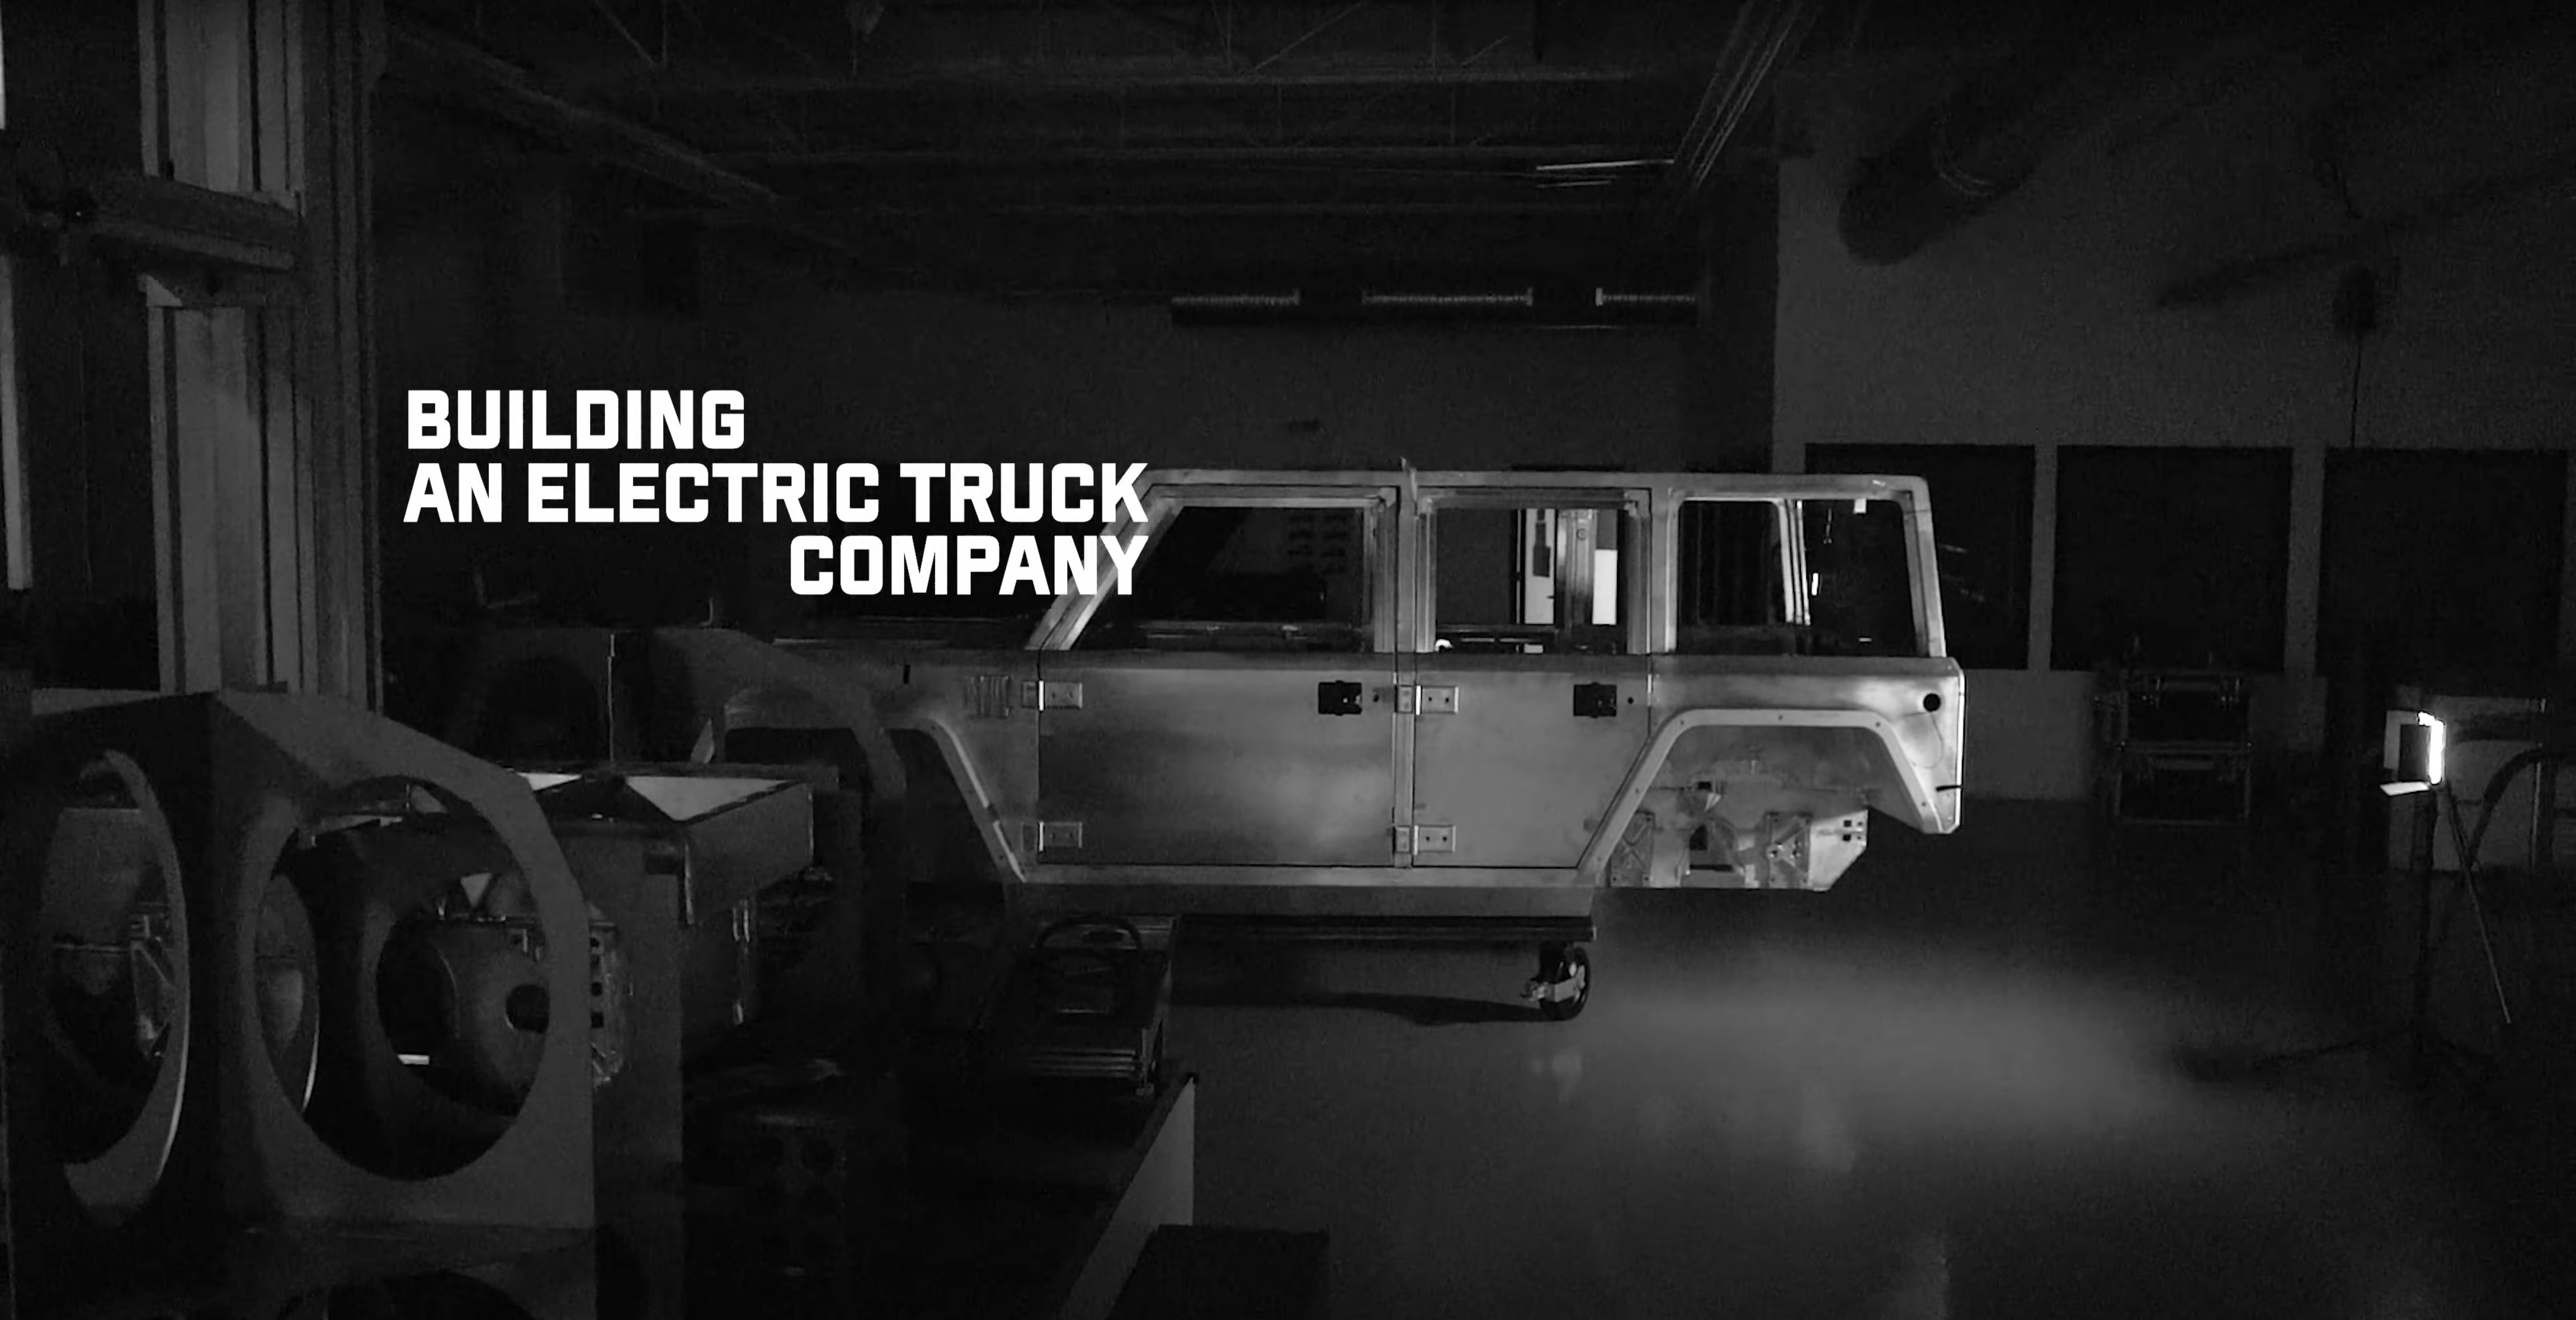 Building an Electric Truck Company title page showing an unfinished B1 prototype in the shop